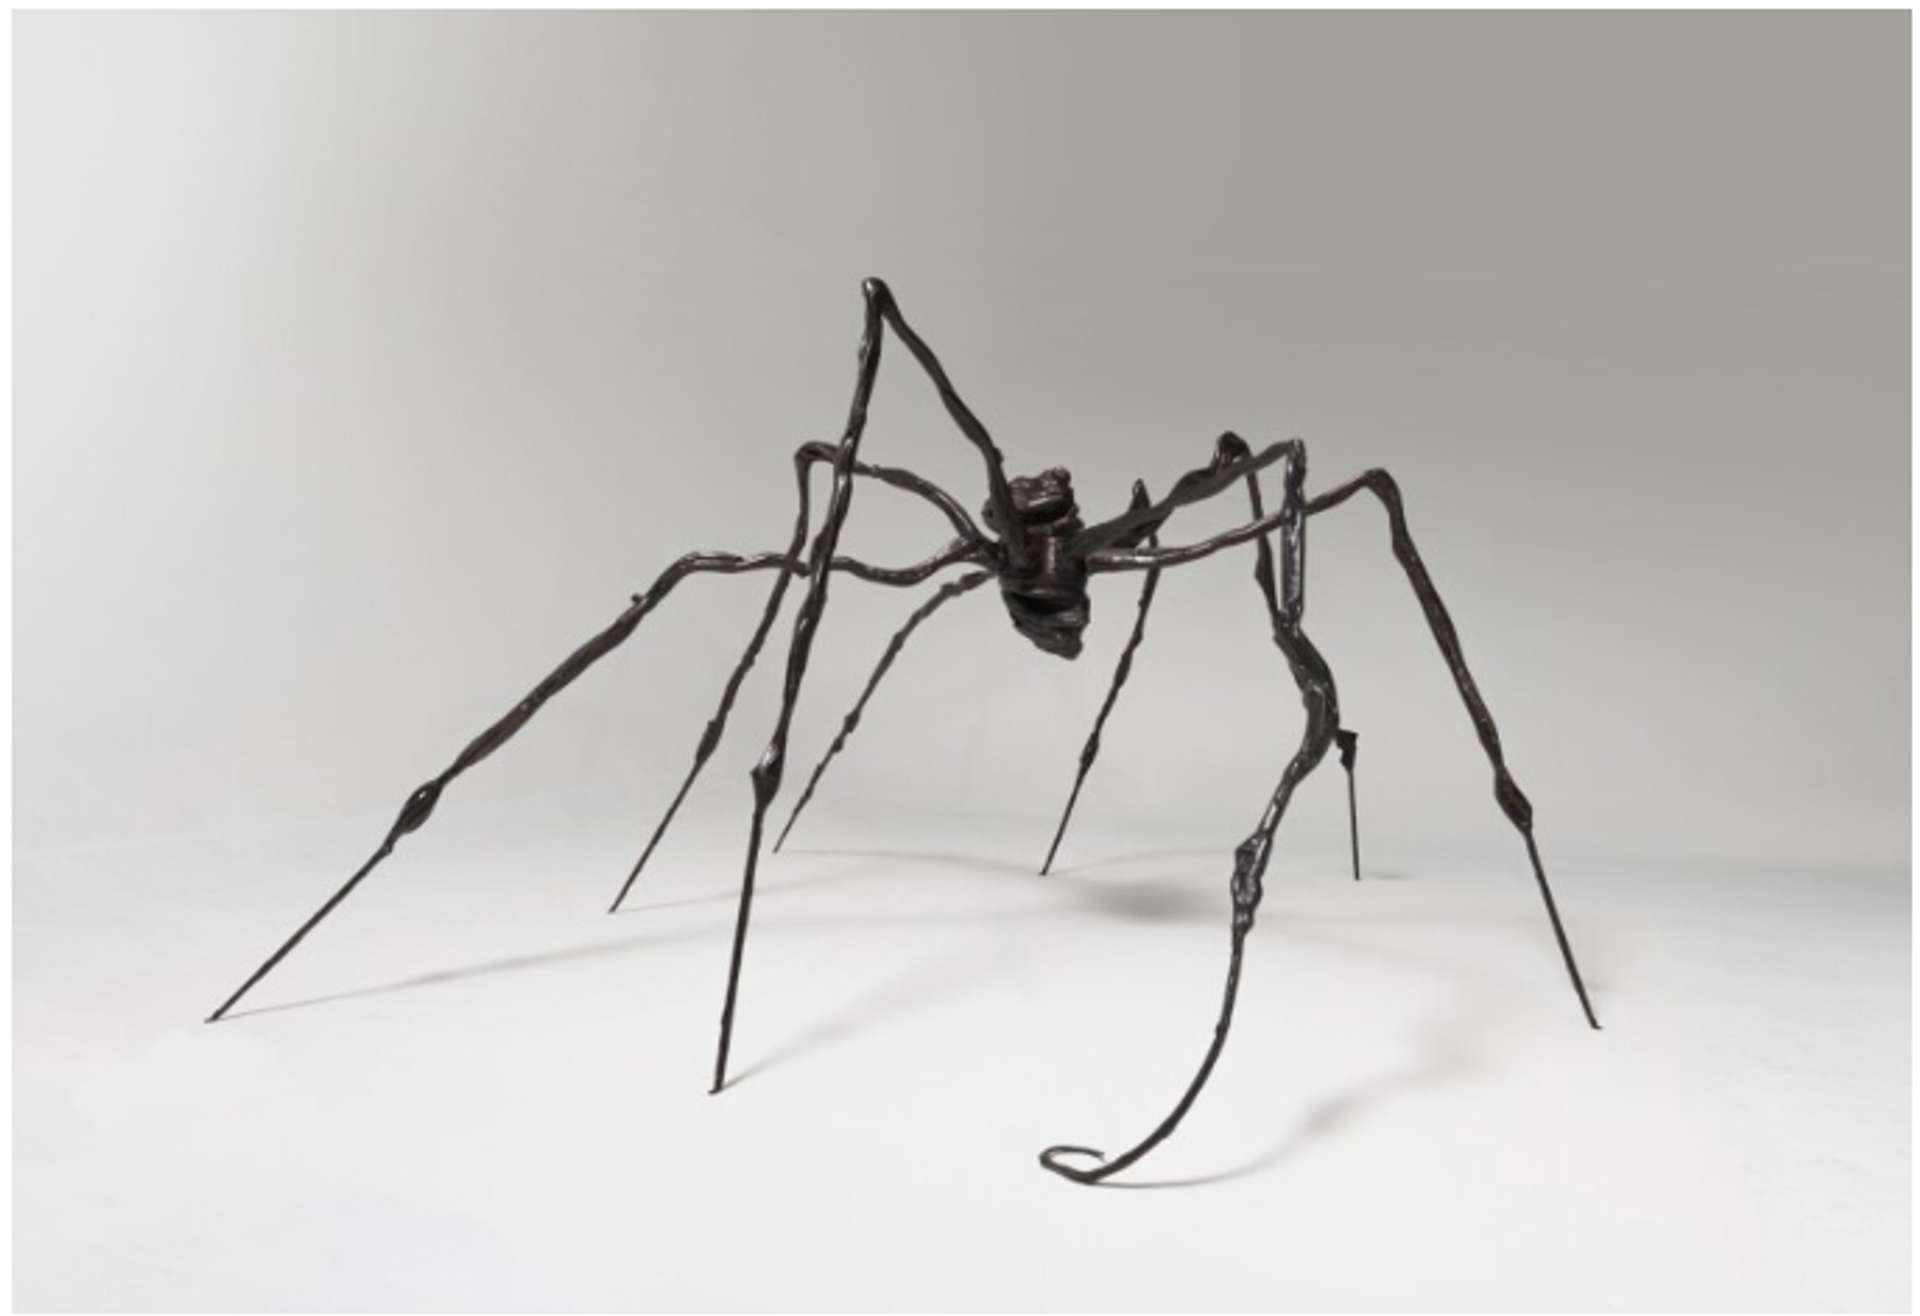 A towering 300 centimeter spider sculpture with eight limbs gracefully balanced on the floor, its front limb curled underneath.